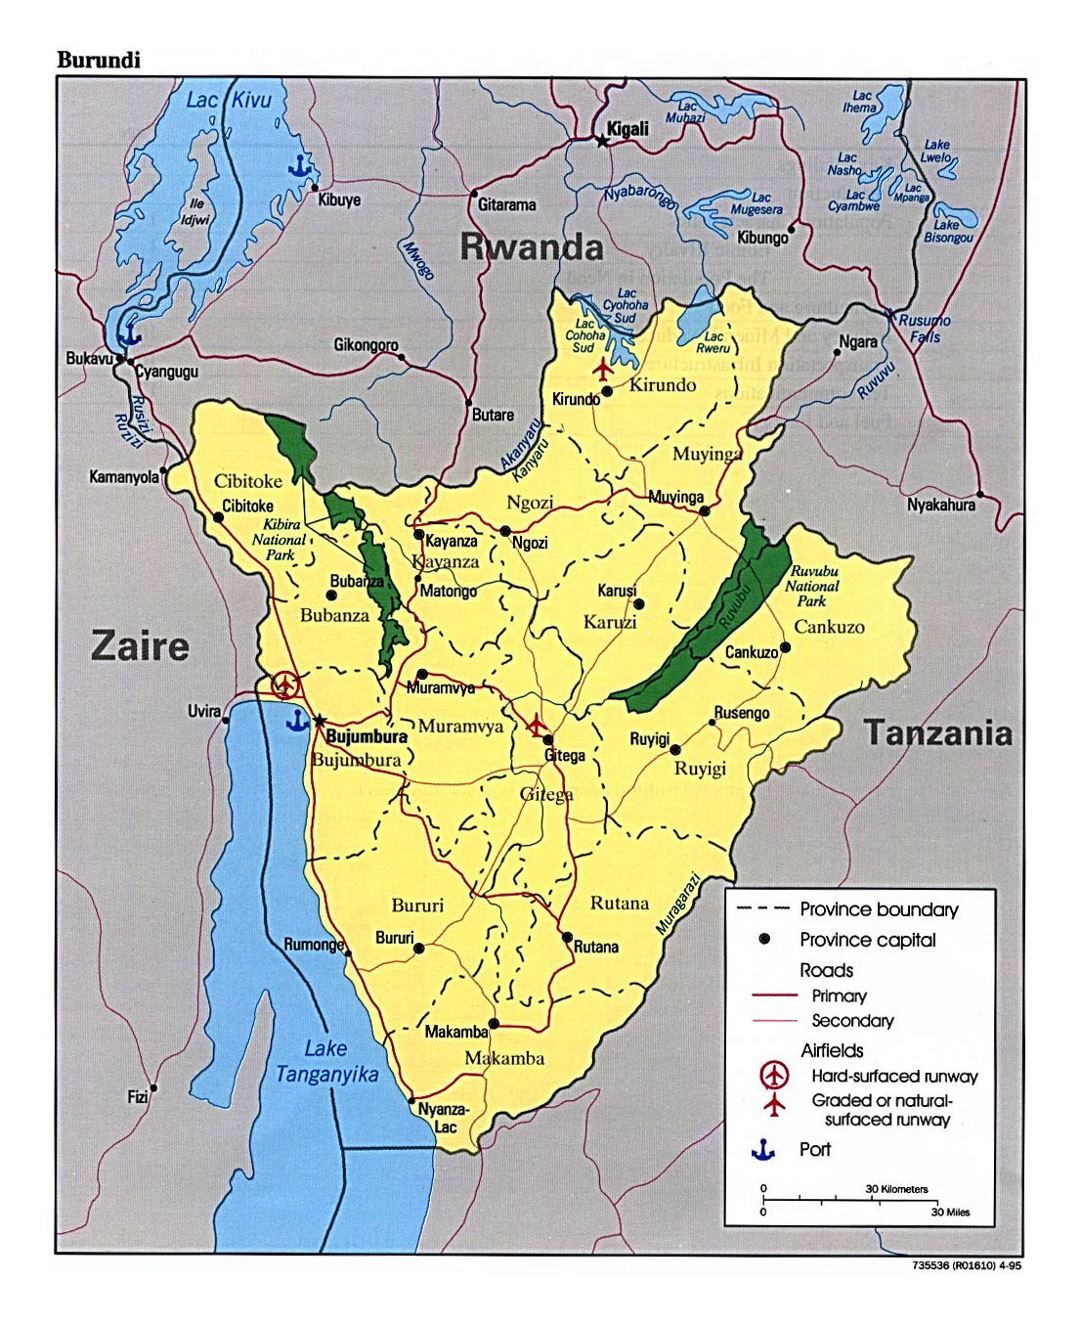 Detailed map of Burundi with administrative divisions, roads, major cities, airports and ports - 1995